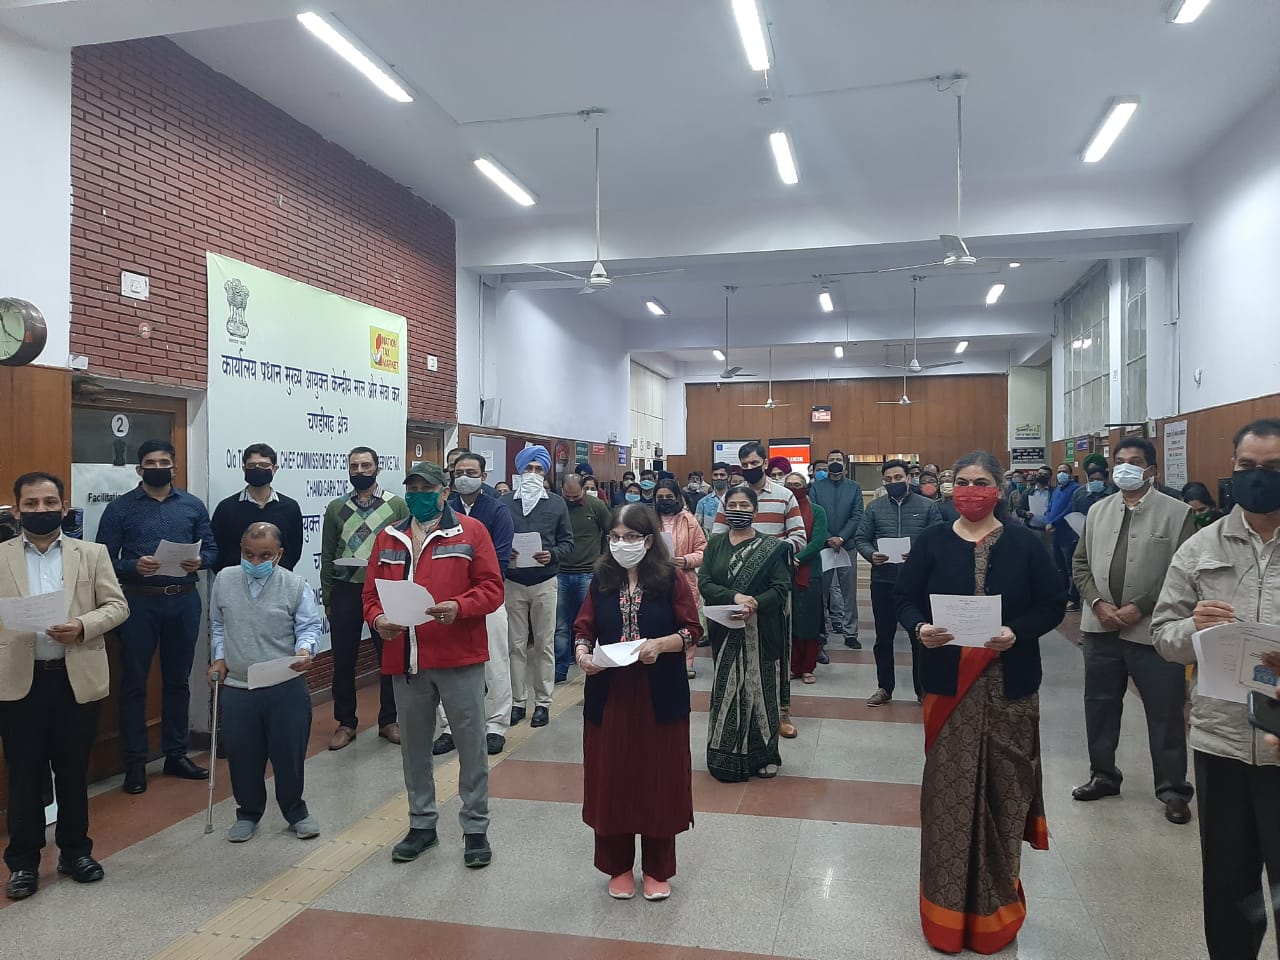 Celebration of Constitution  Day on 26.11.2020 at CGST Zone Chandigarh